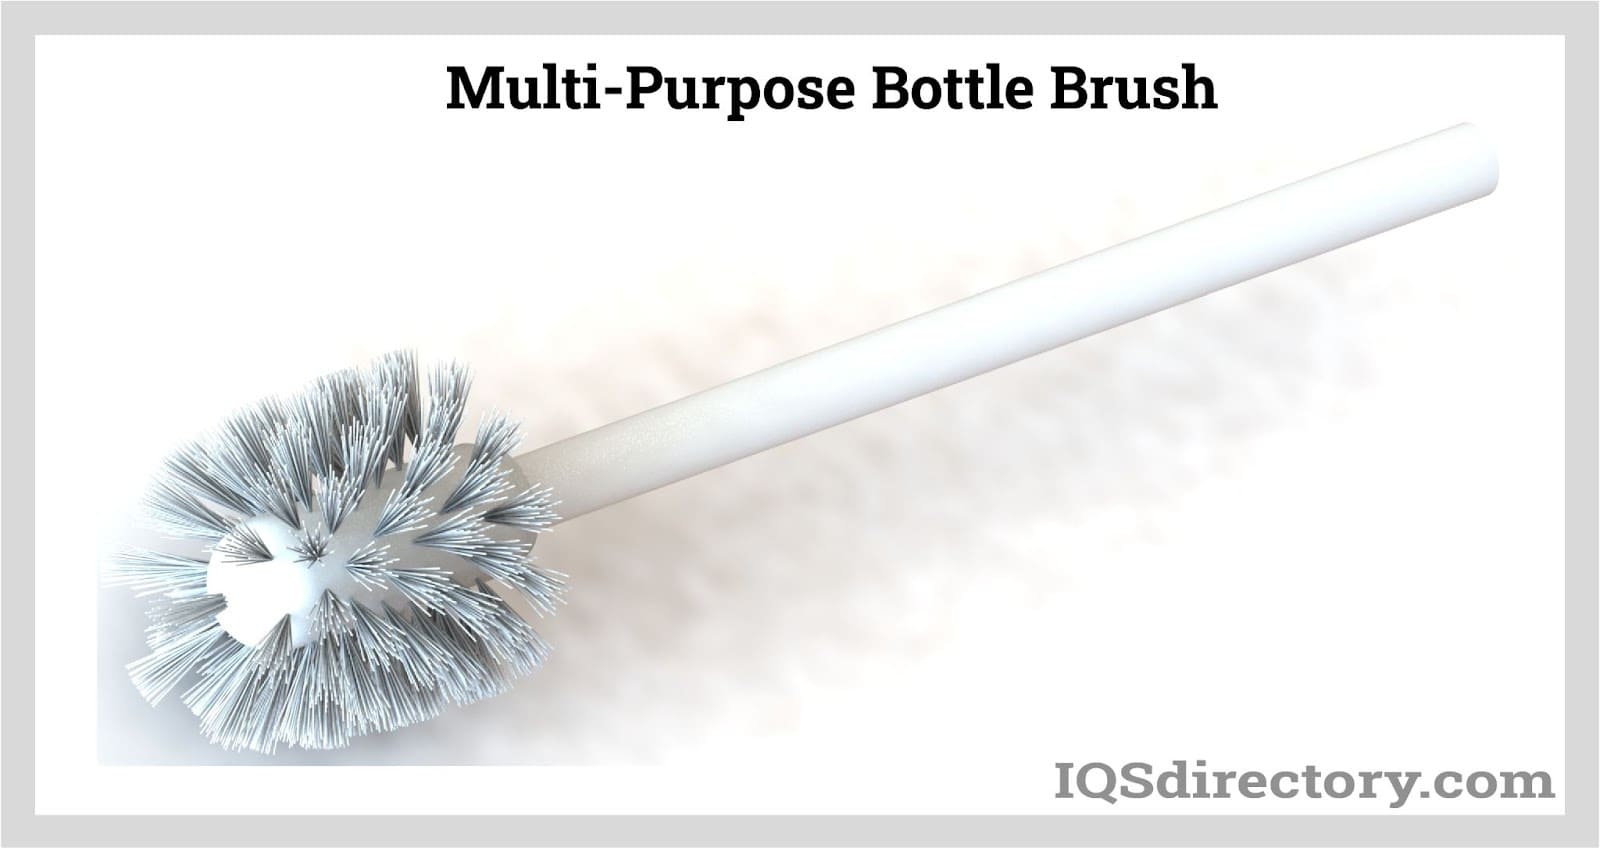 Bottle Brushes: Types, Uses, Features and Benefits